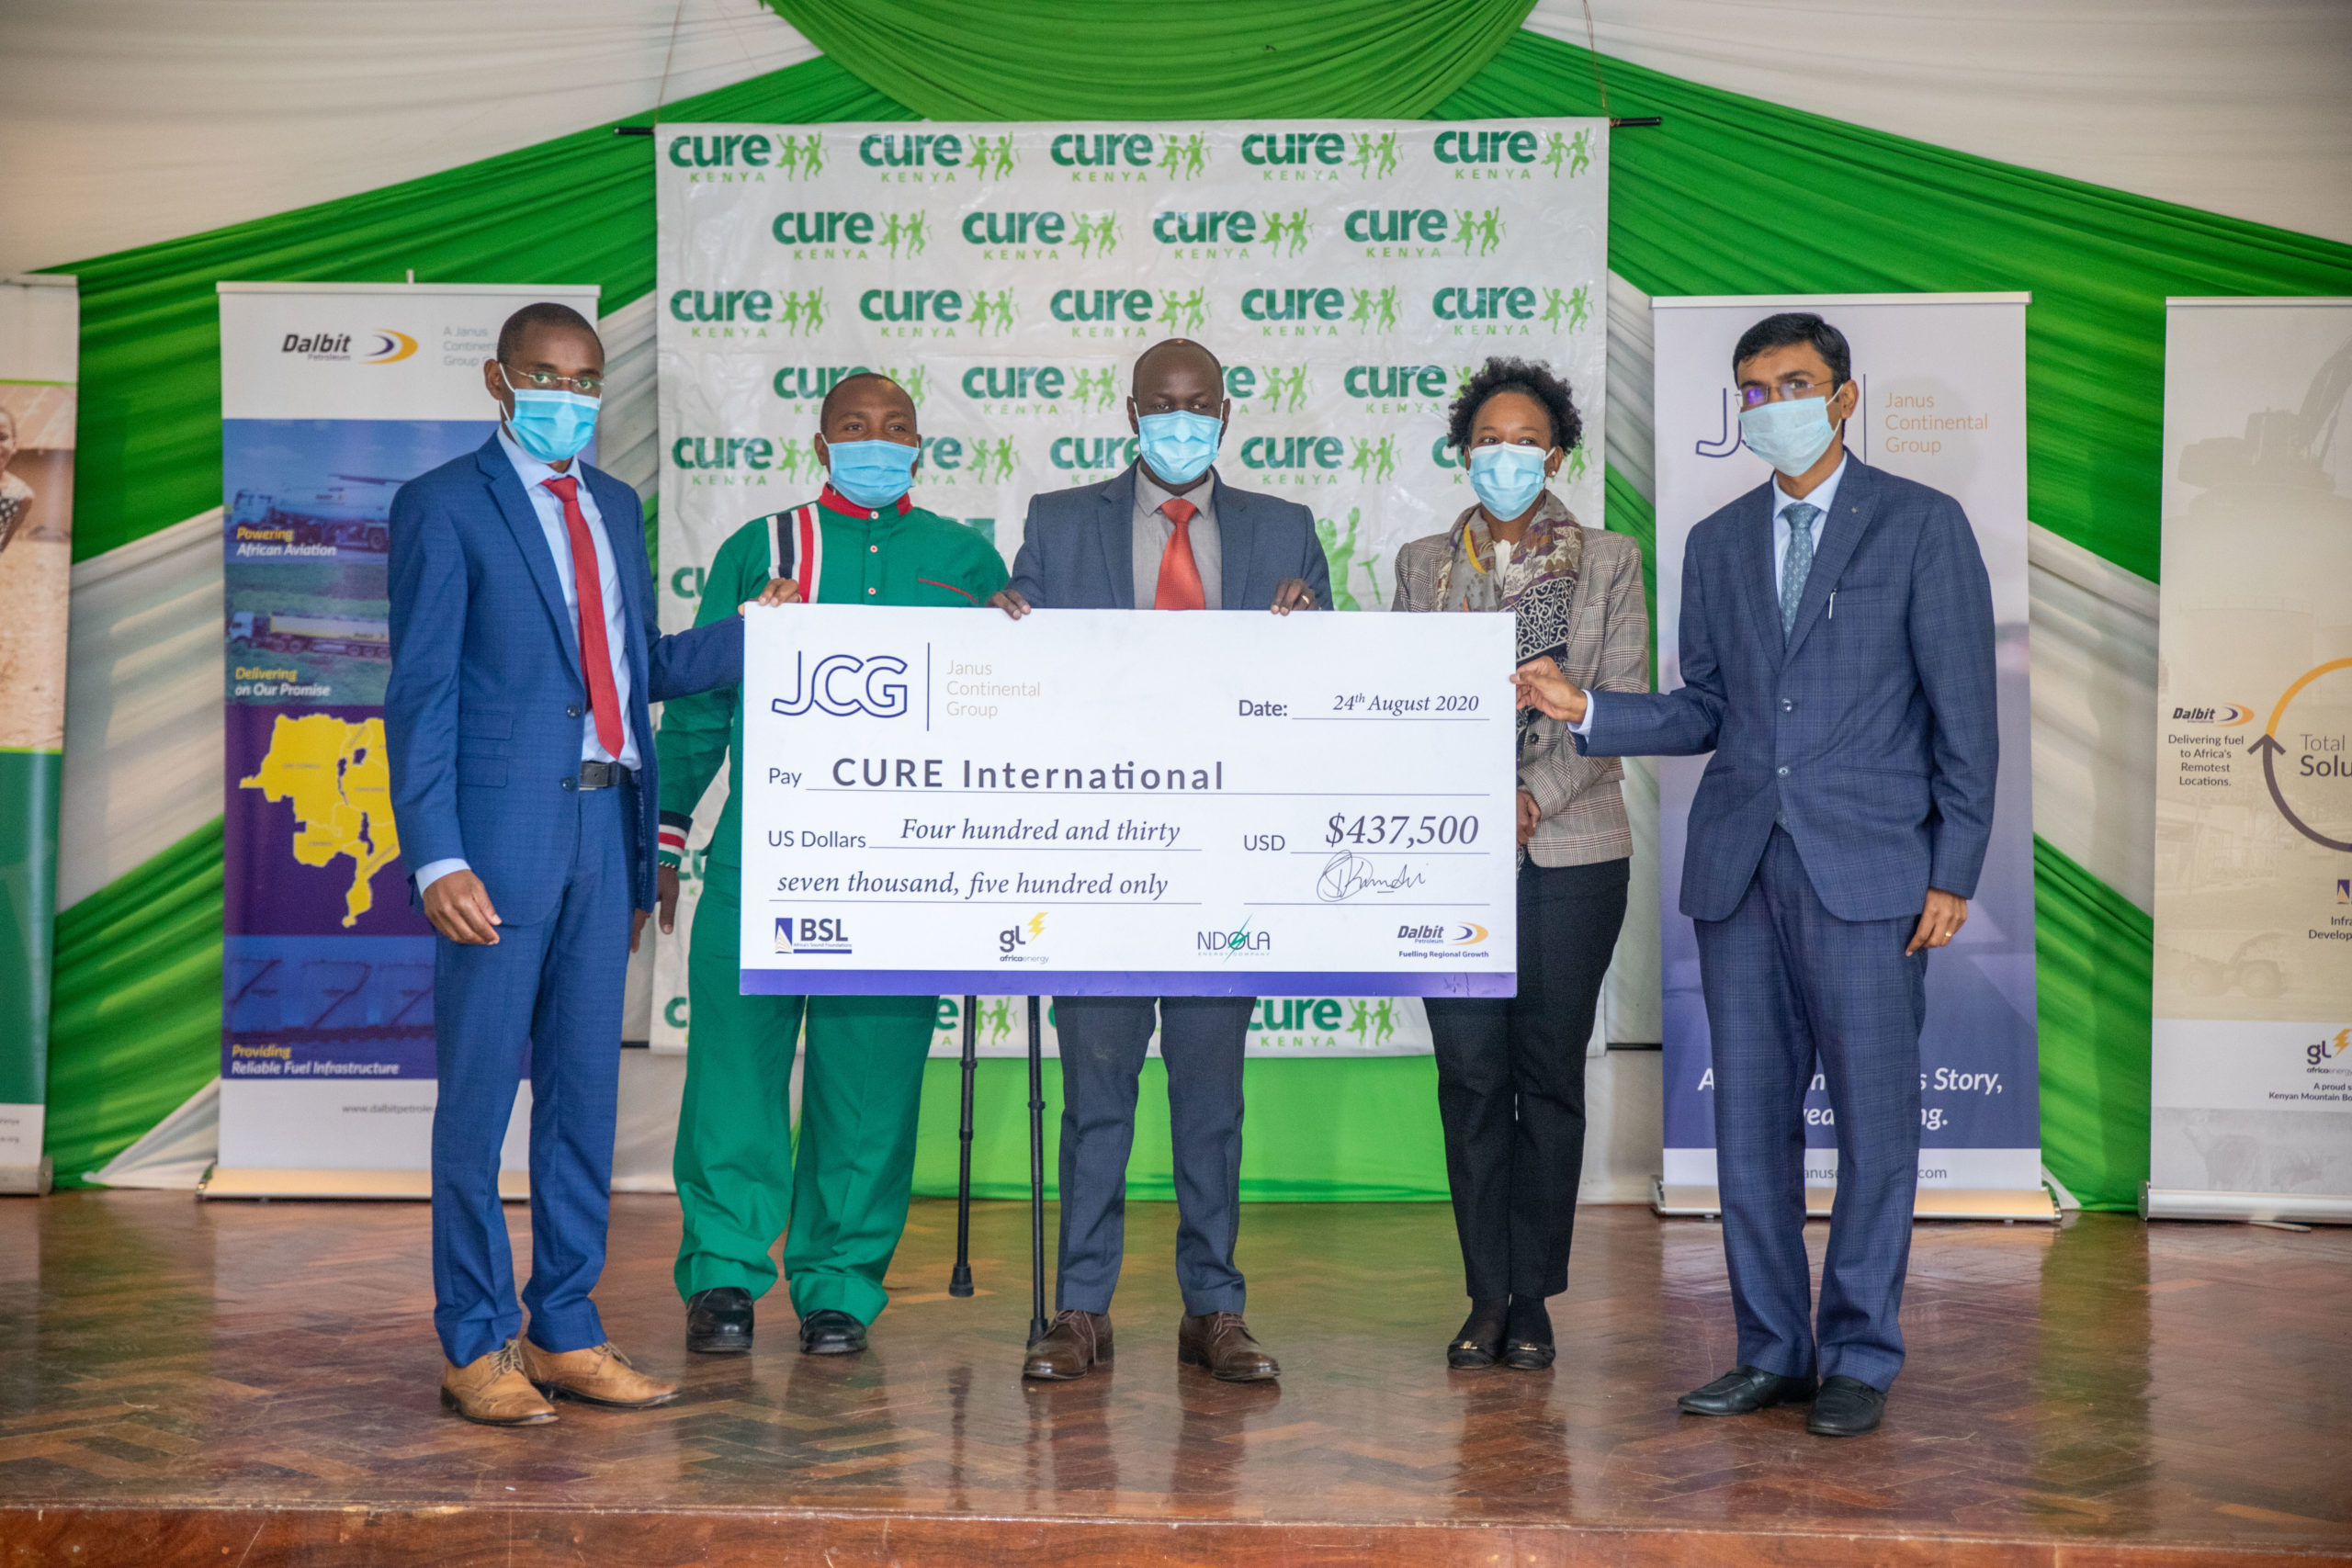 JCG Responds to the Need for PPE Gear with a Donation to CURE International